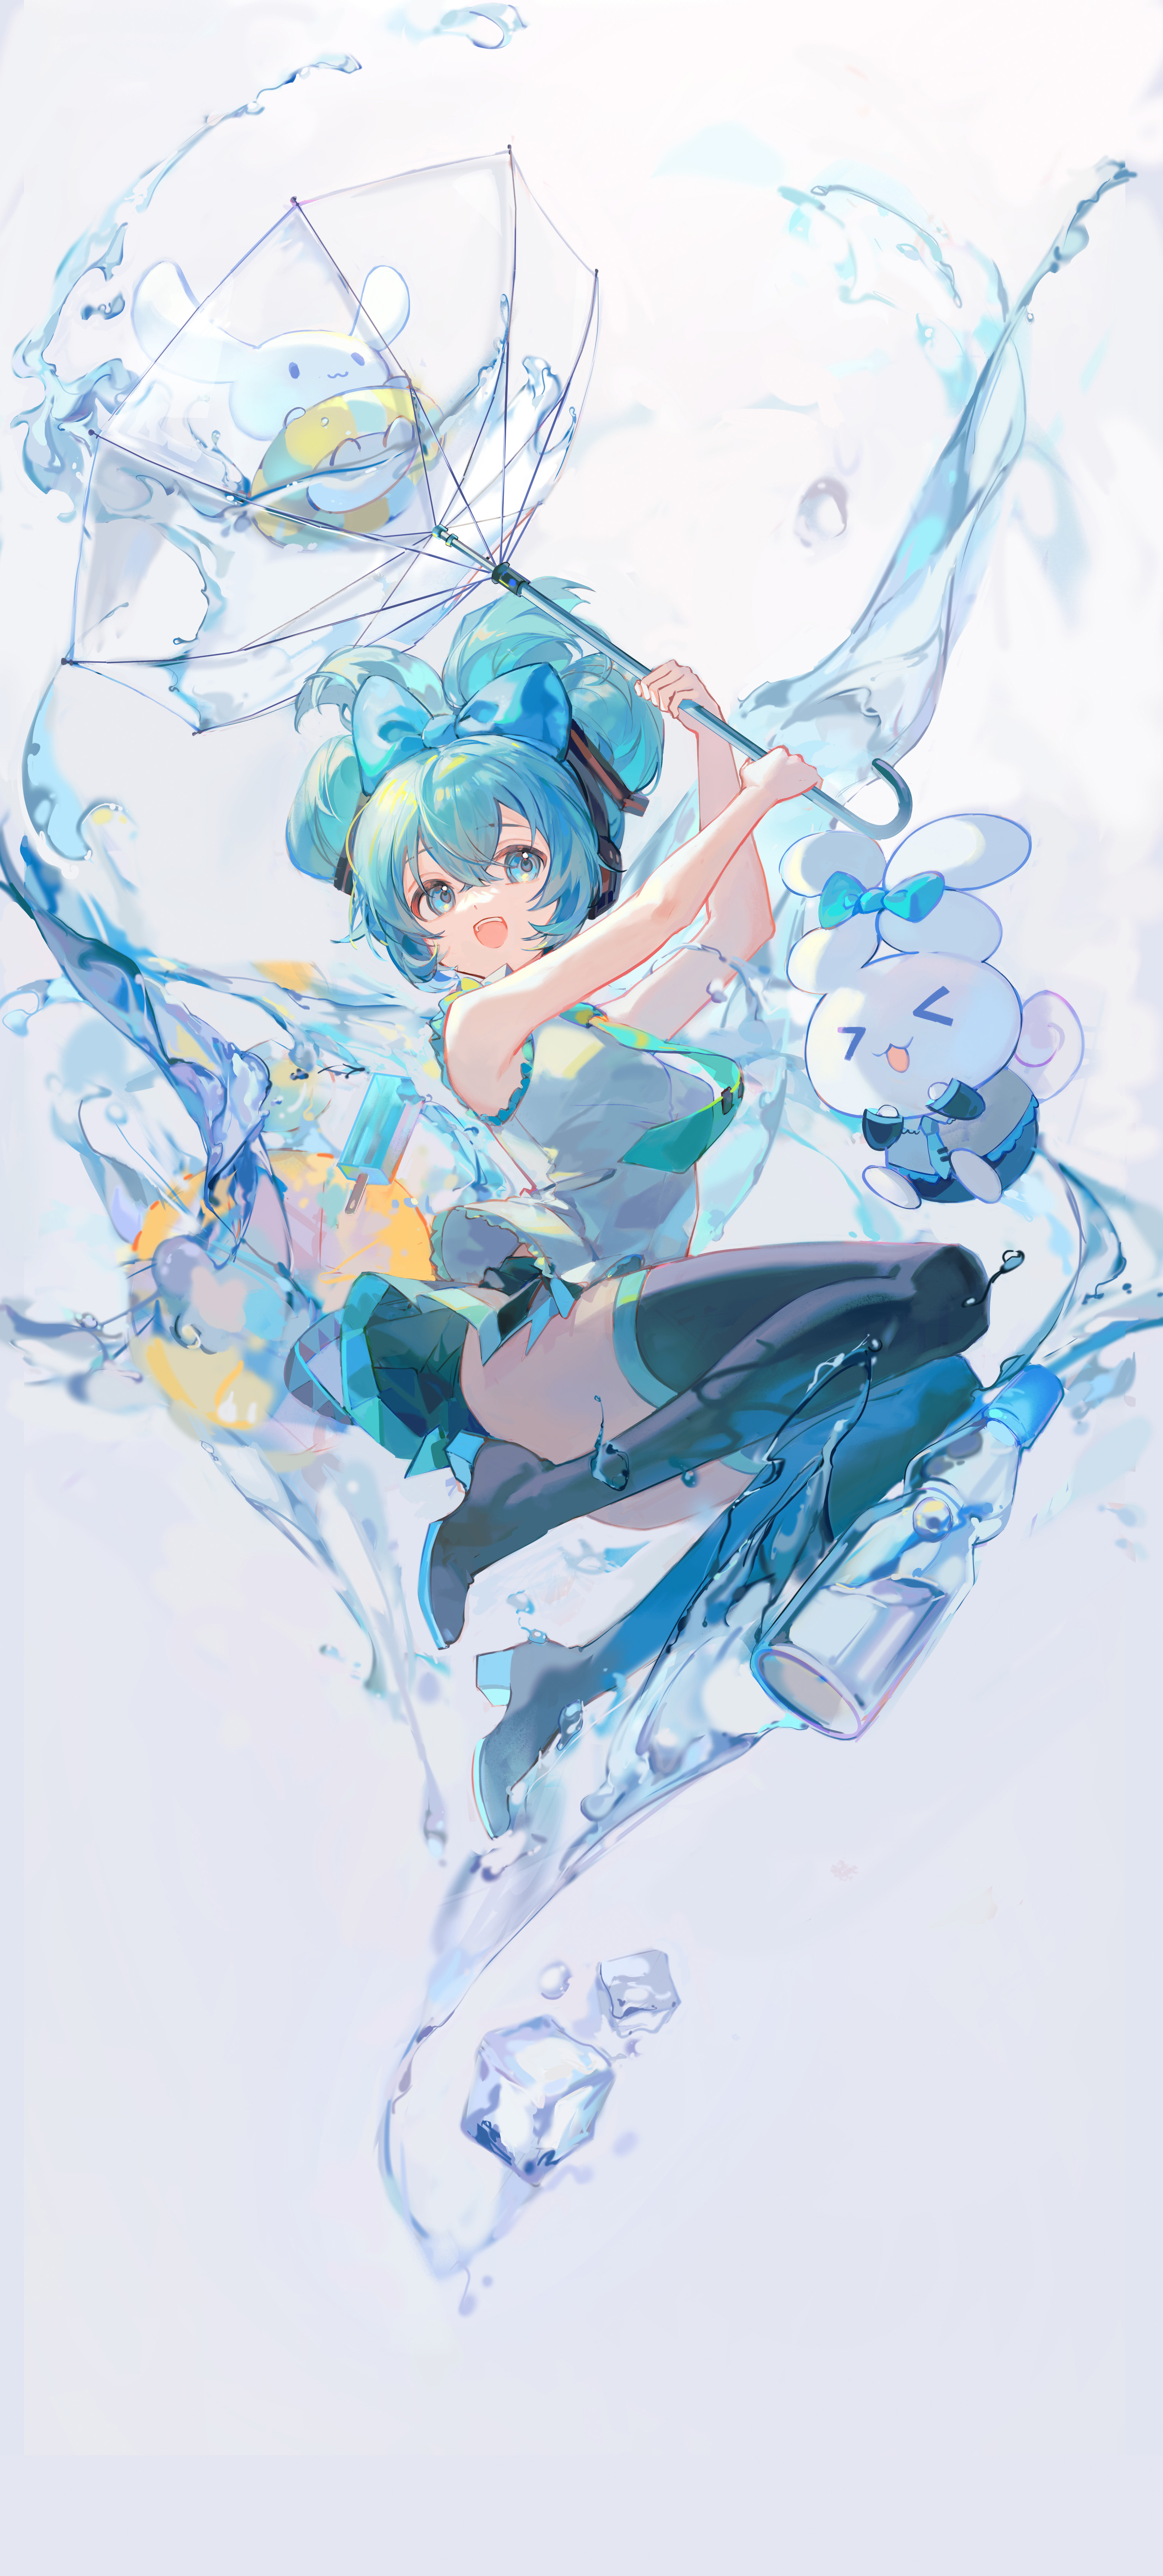 Anime 3056x6767 anime anime girls Hatsune Miku Vocaloid portrait display stockings blue hair blue eyes simple background white background minimalism bow tie water looking at viewer headphones open mouth umbrella floater ice cubes